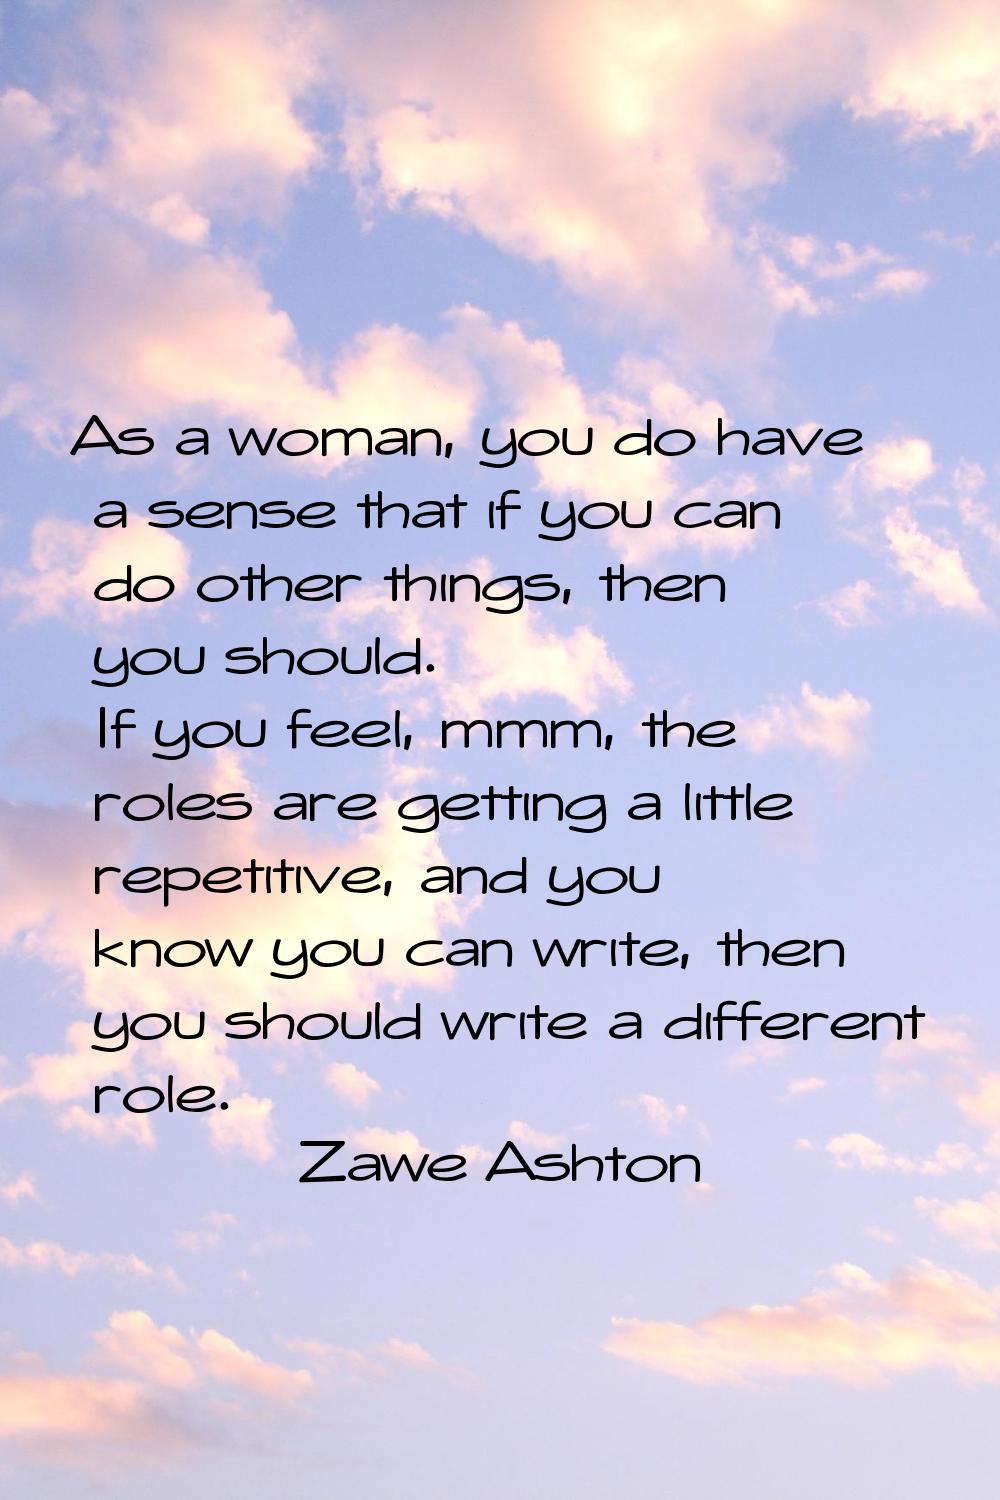 As a woman, you do have a sense that if you can do other things, then you should. If you feel, mmm,